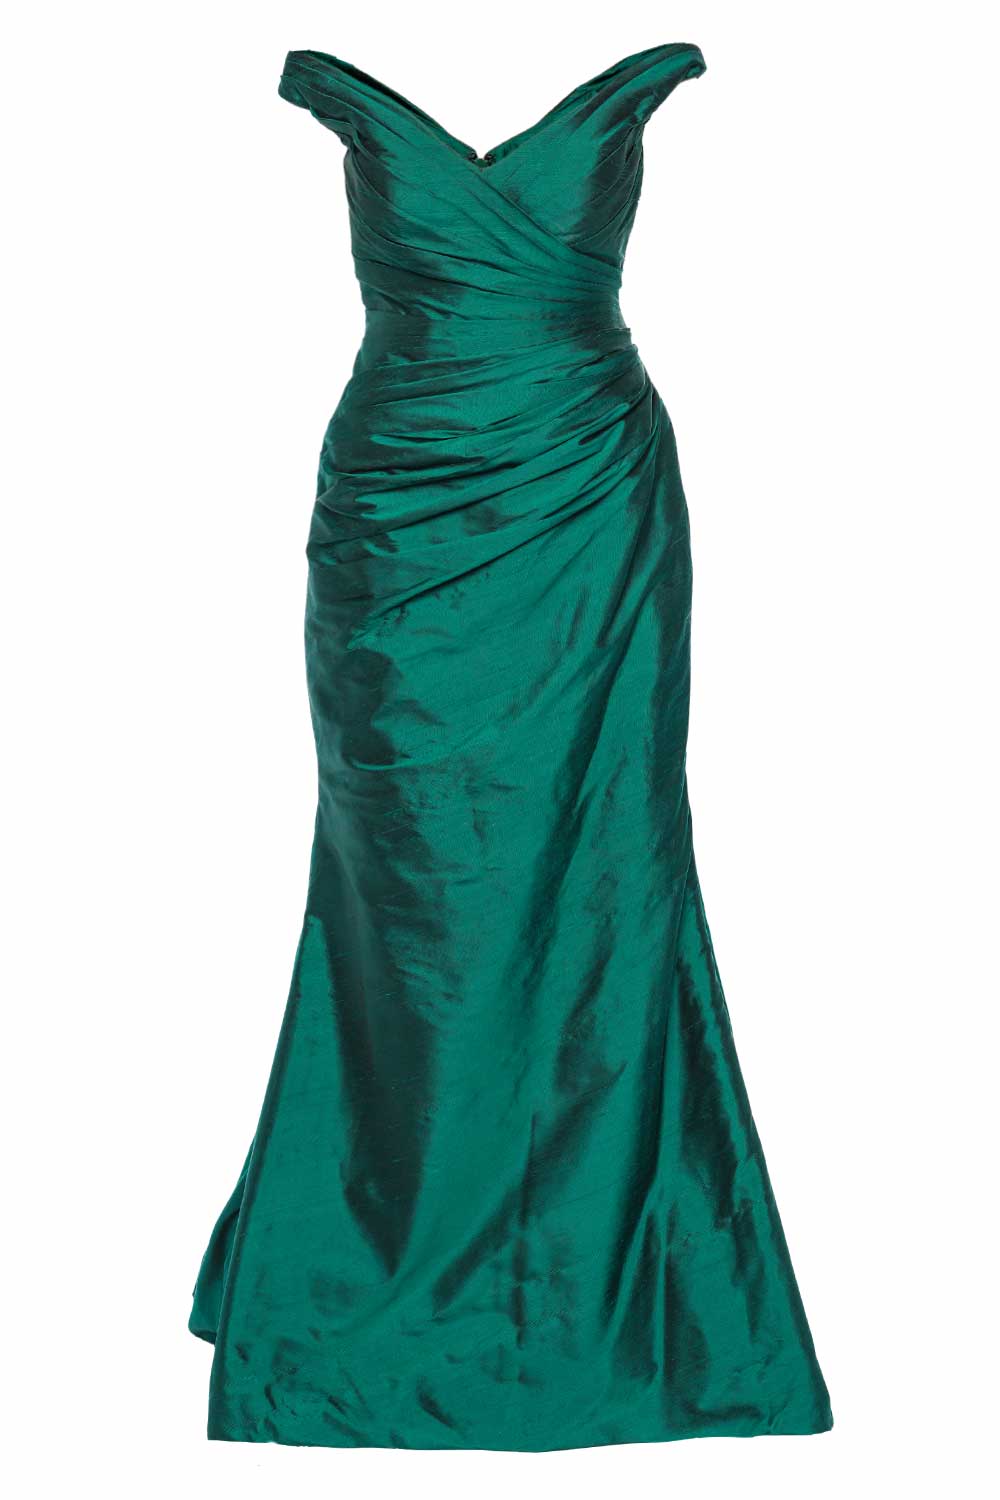 Romona Keveza Emerald Off Shoulder Ruched Gown